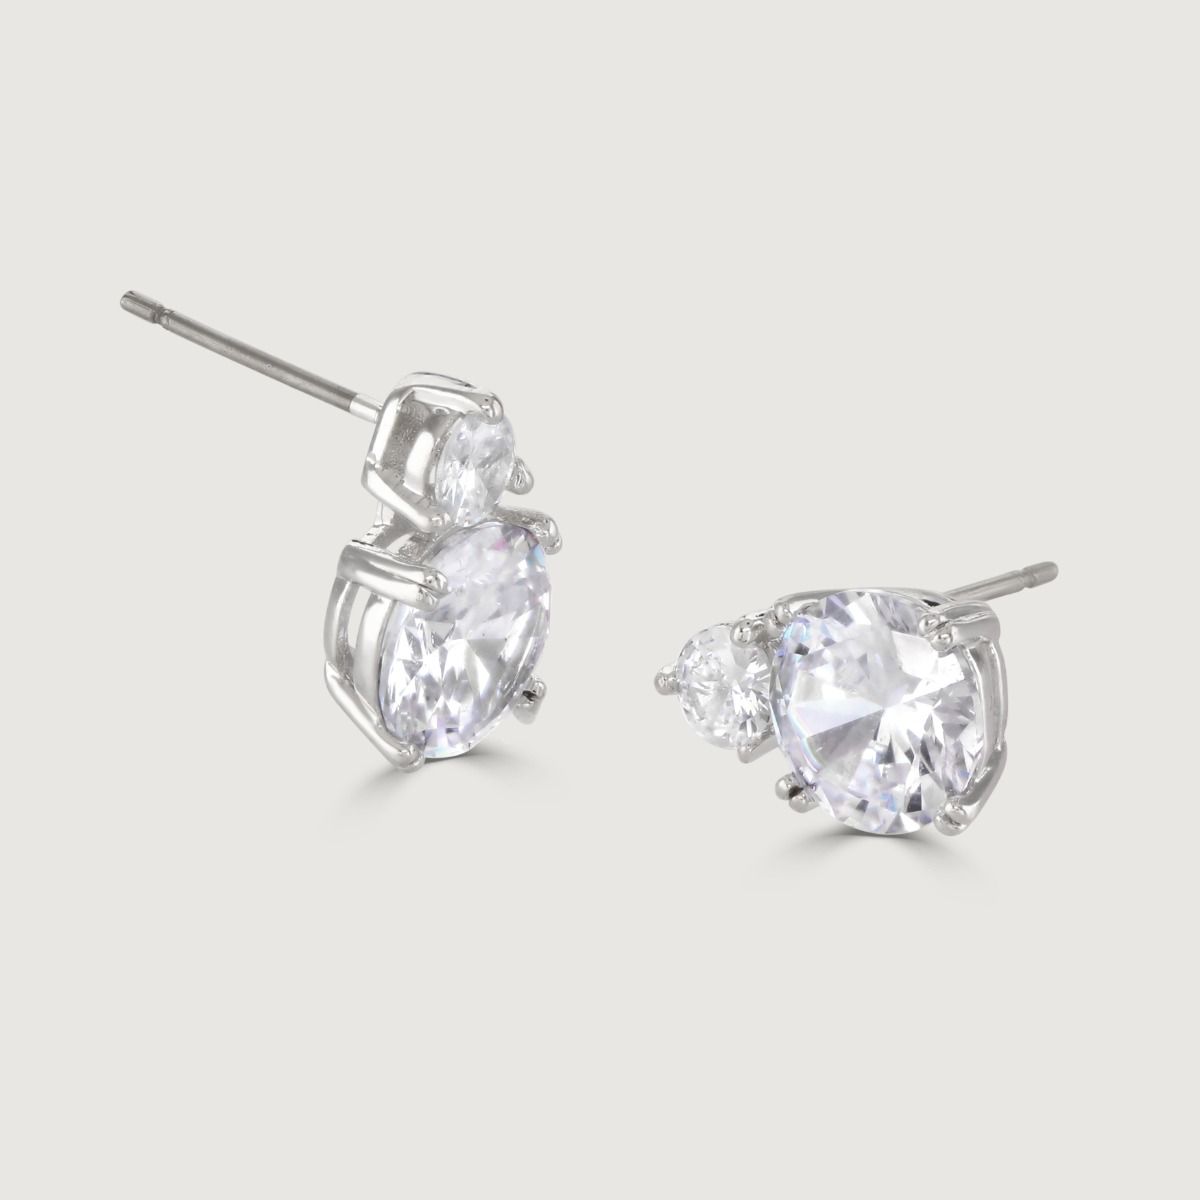 These show stopping stud earrings are set with a flawless brilliant cut cubic zirconia above a striking cushion cut clear stone. Wear to add timeless glamour to any look.